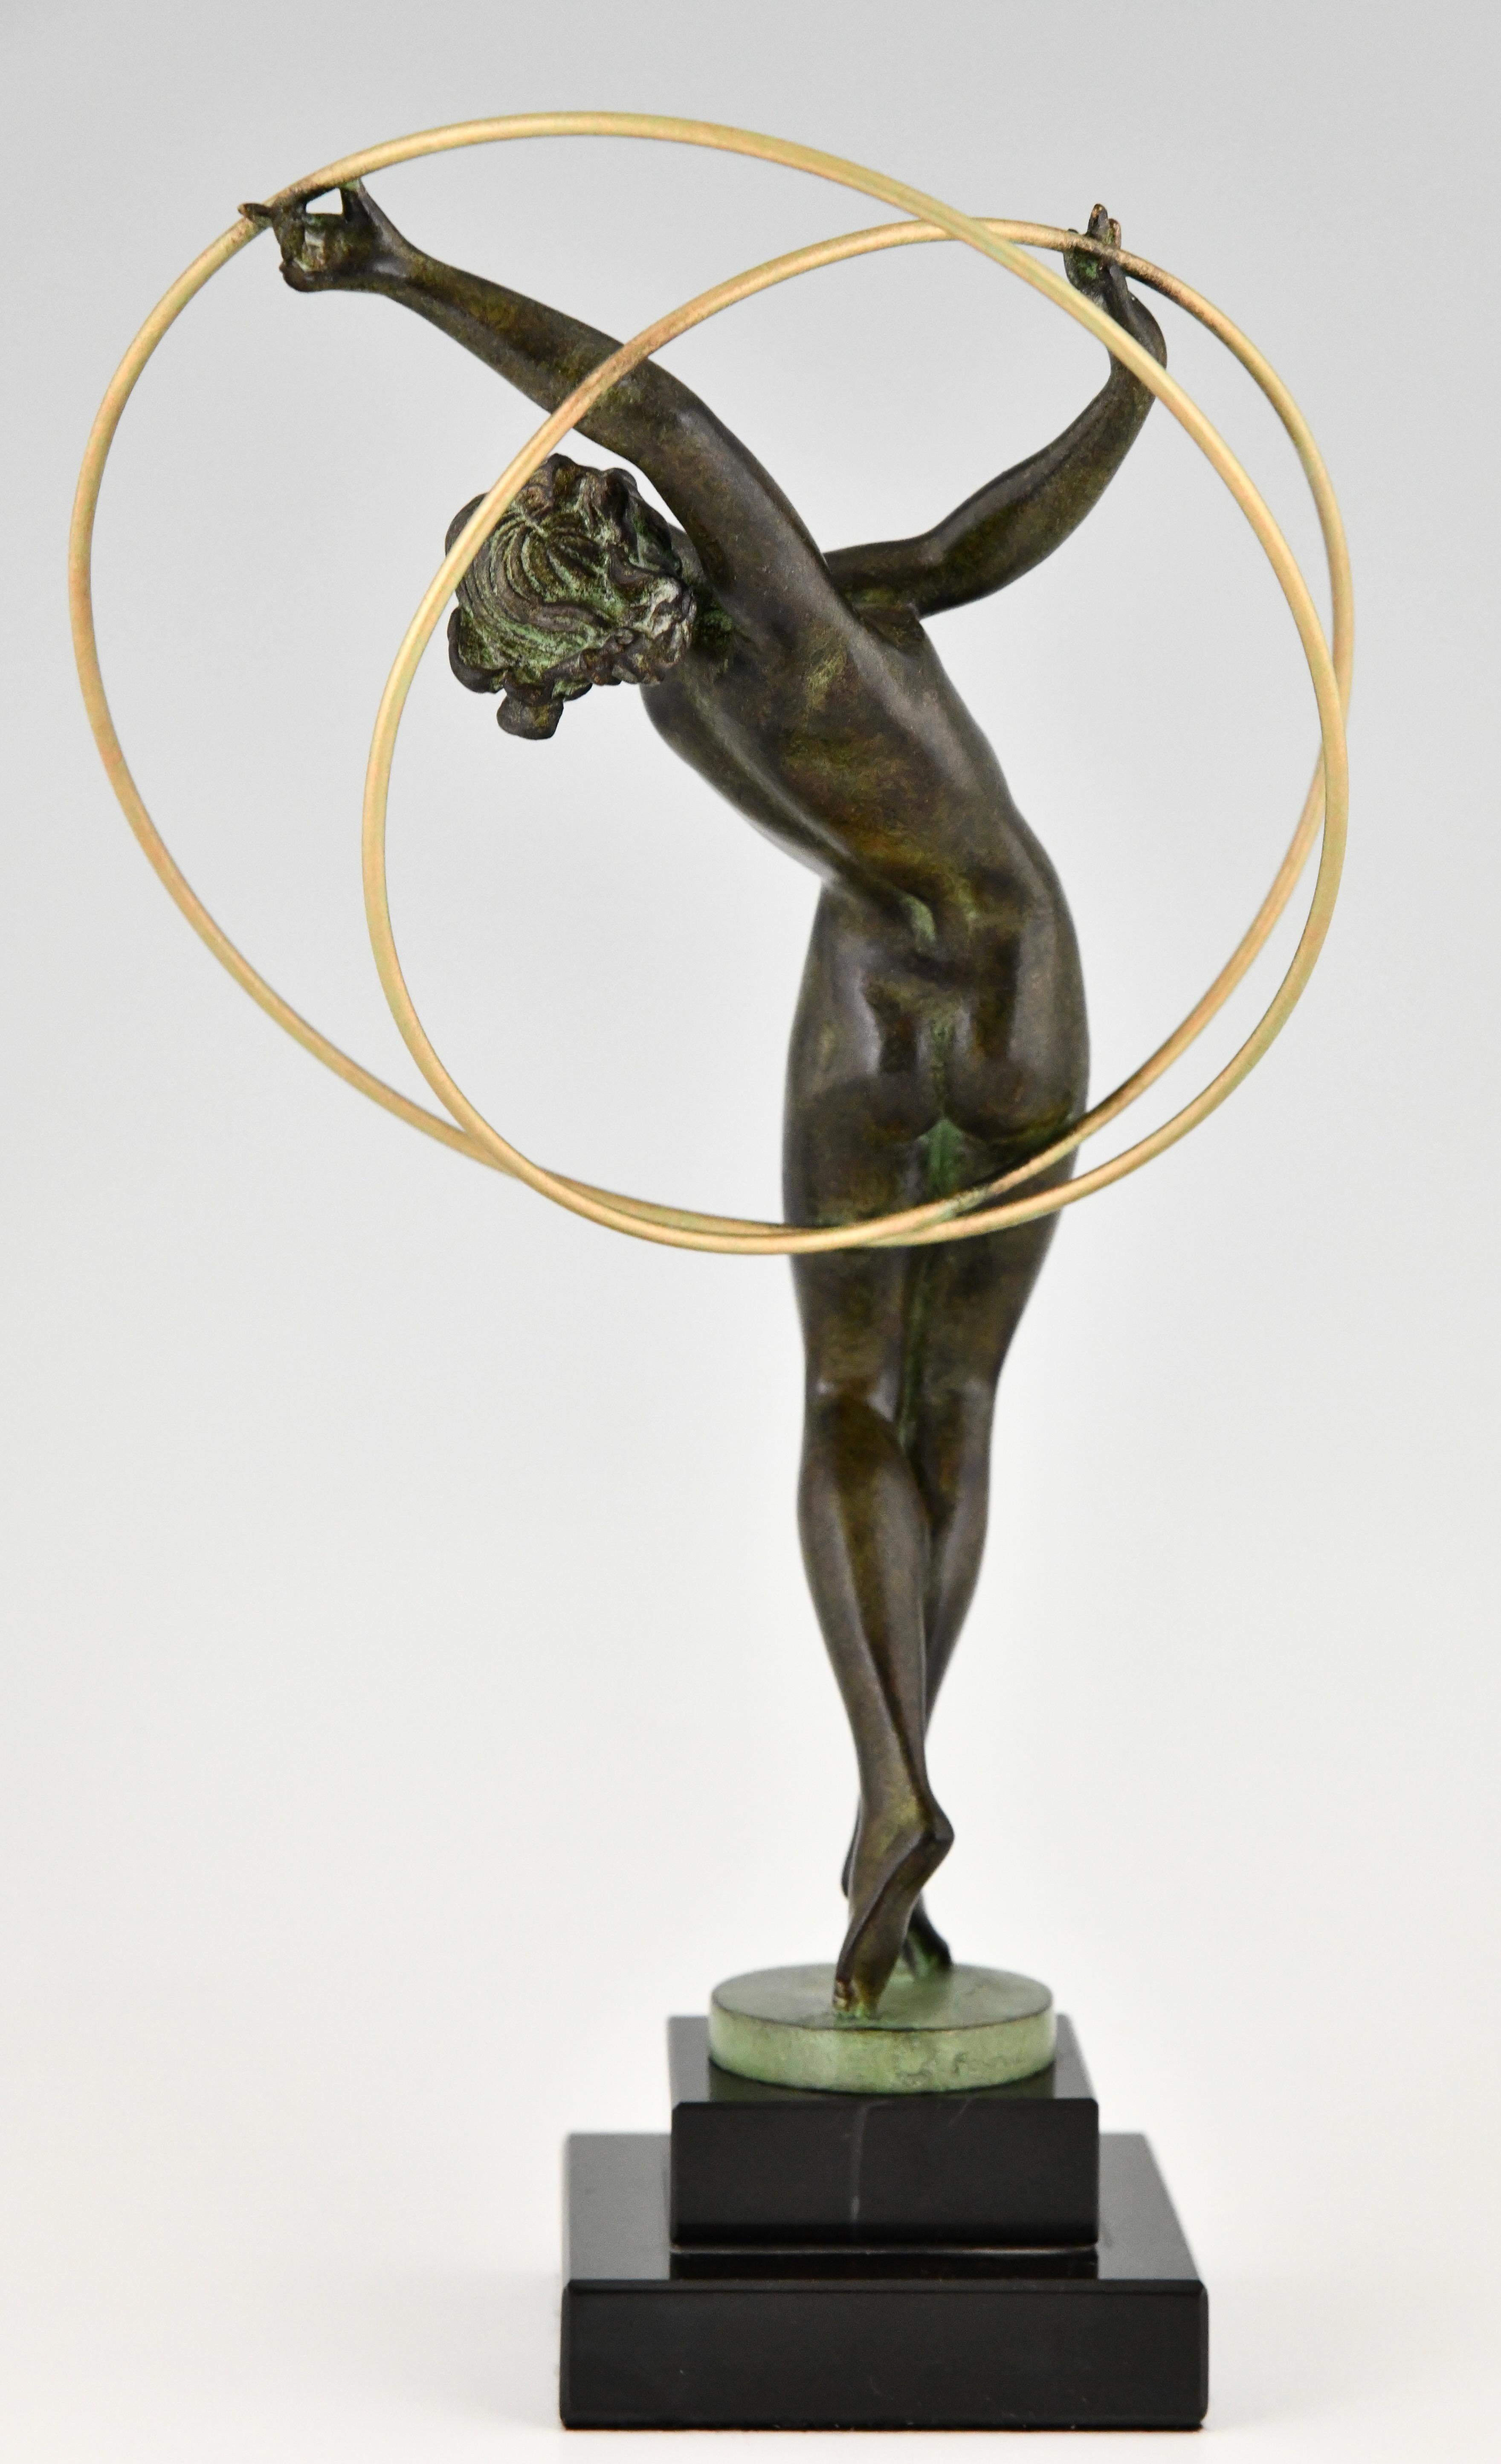 Patinated Art Deco style Sculpture Nude Hoop Dancer ILLUSION by Fayral for Max Le Verrier For Sale